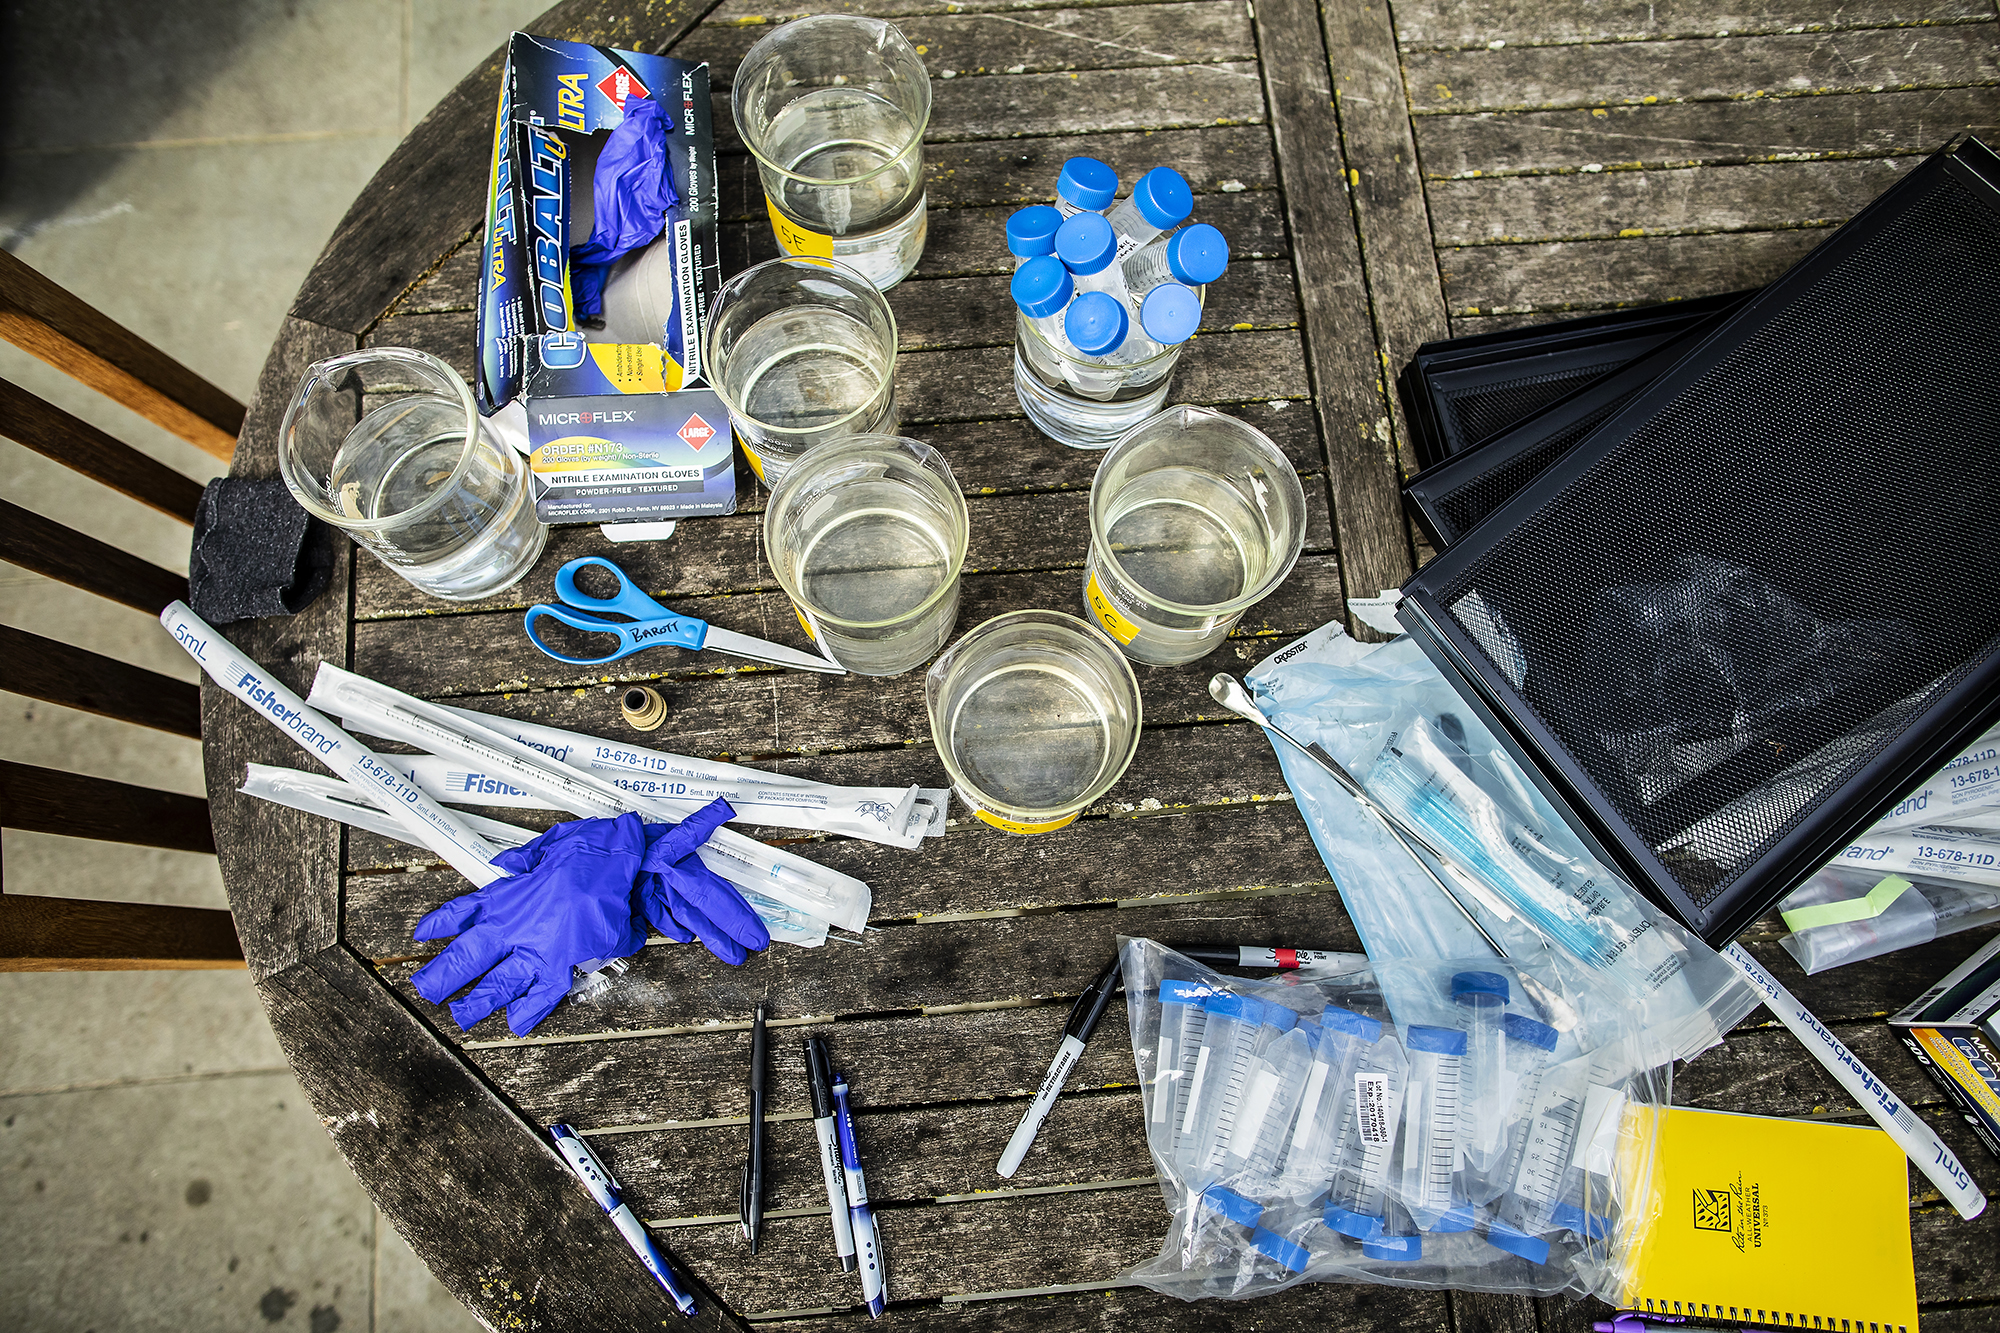 On a wooden table is an array of scientific equipment - graduated cylinders, test tubes, pipettes, markers, scissors, and a field notebook.